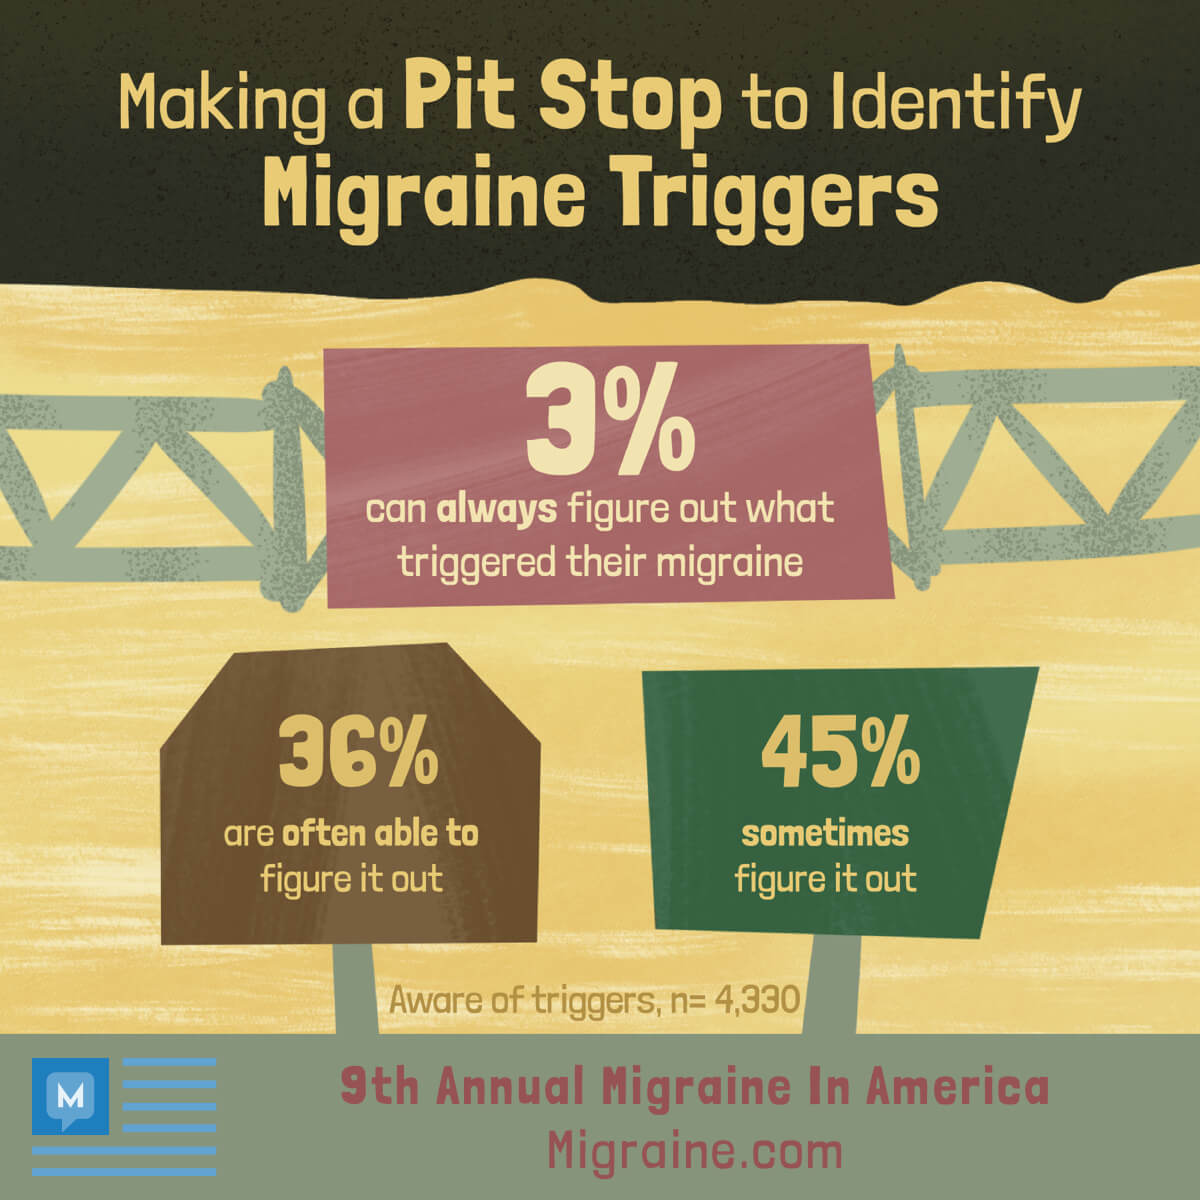 Only 3% of Migraine In America survey respondents can always figure out what triggered their migraine attack.